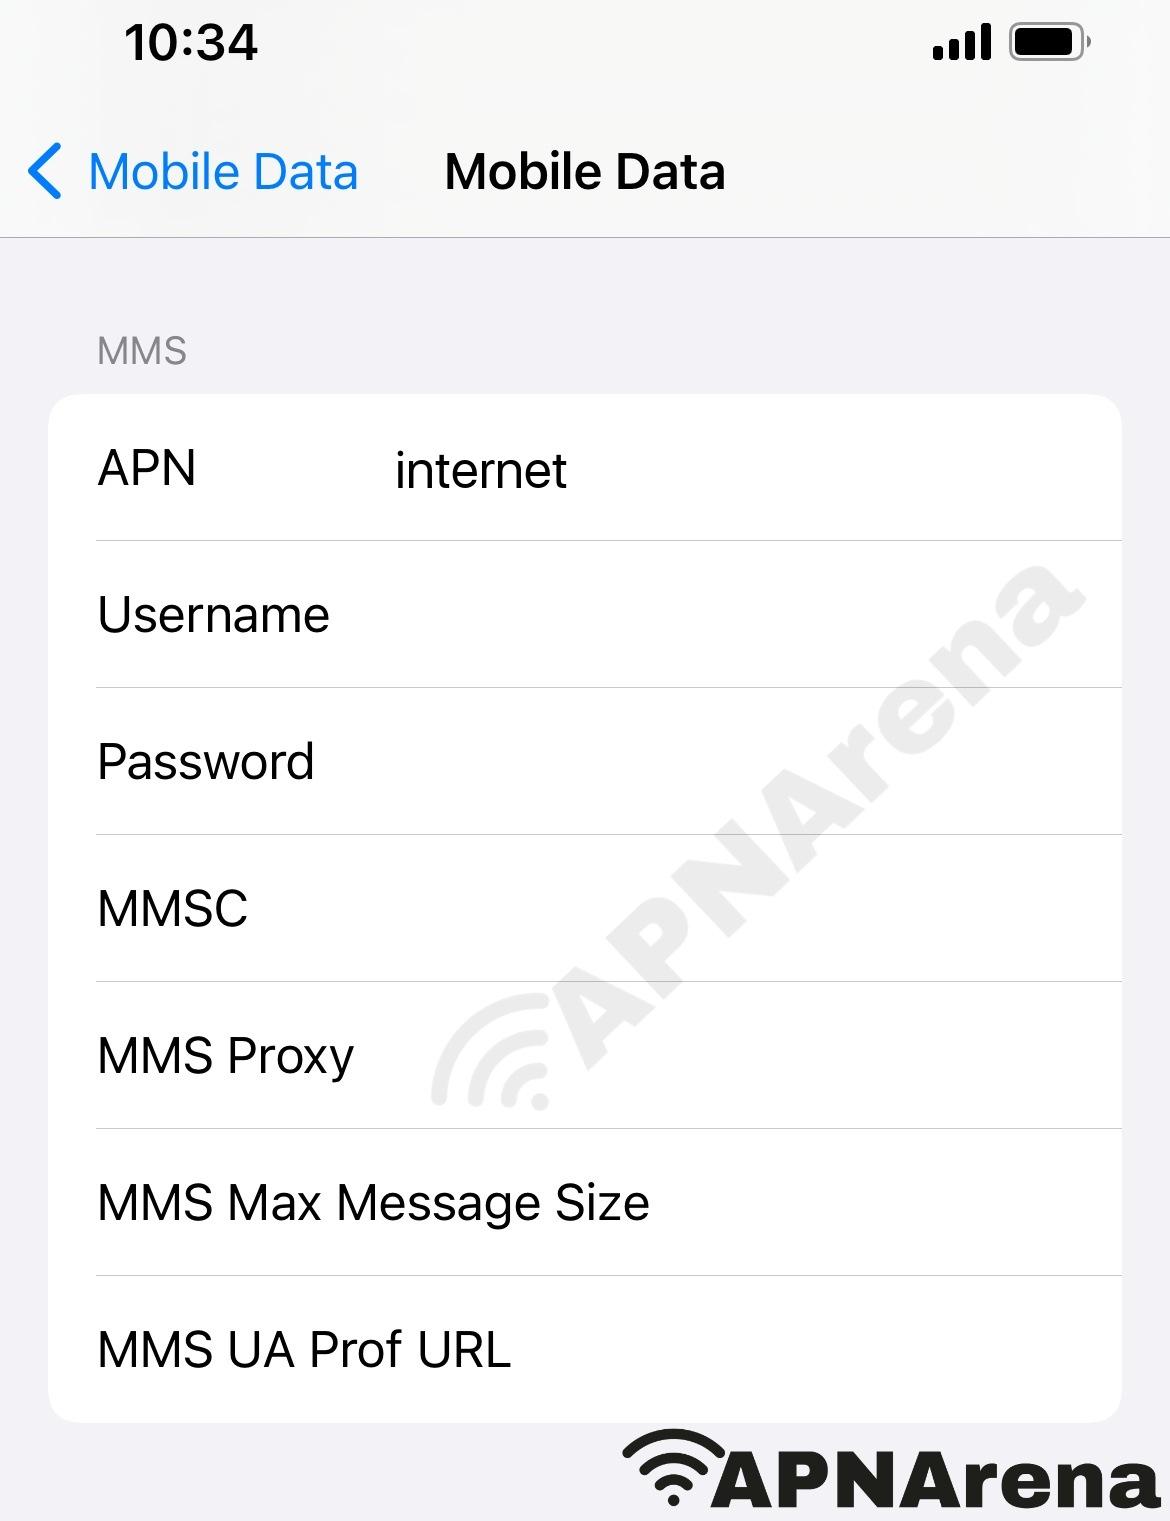 Extra MMS Settings for iPhone